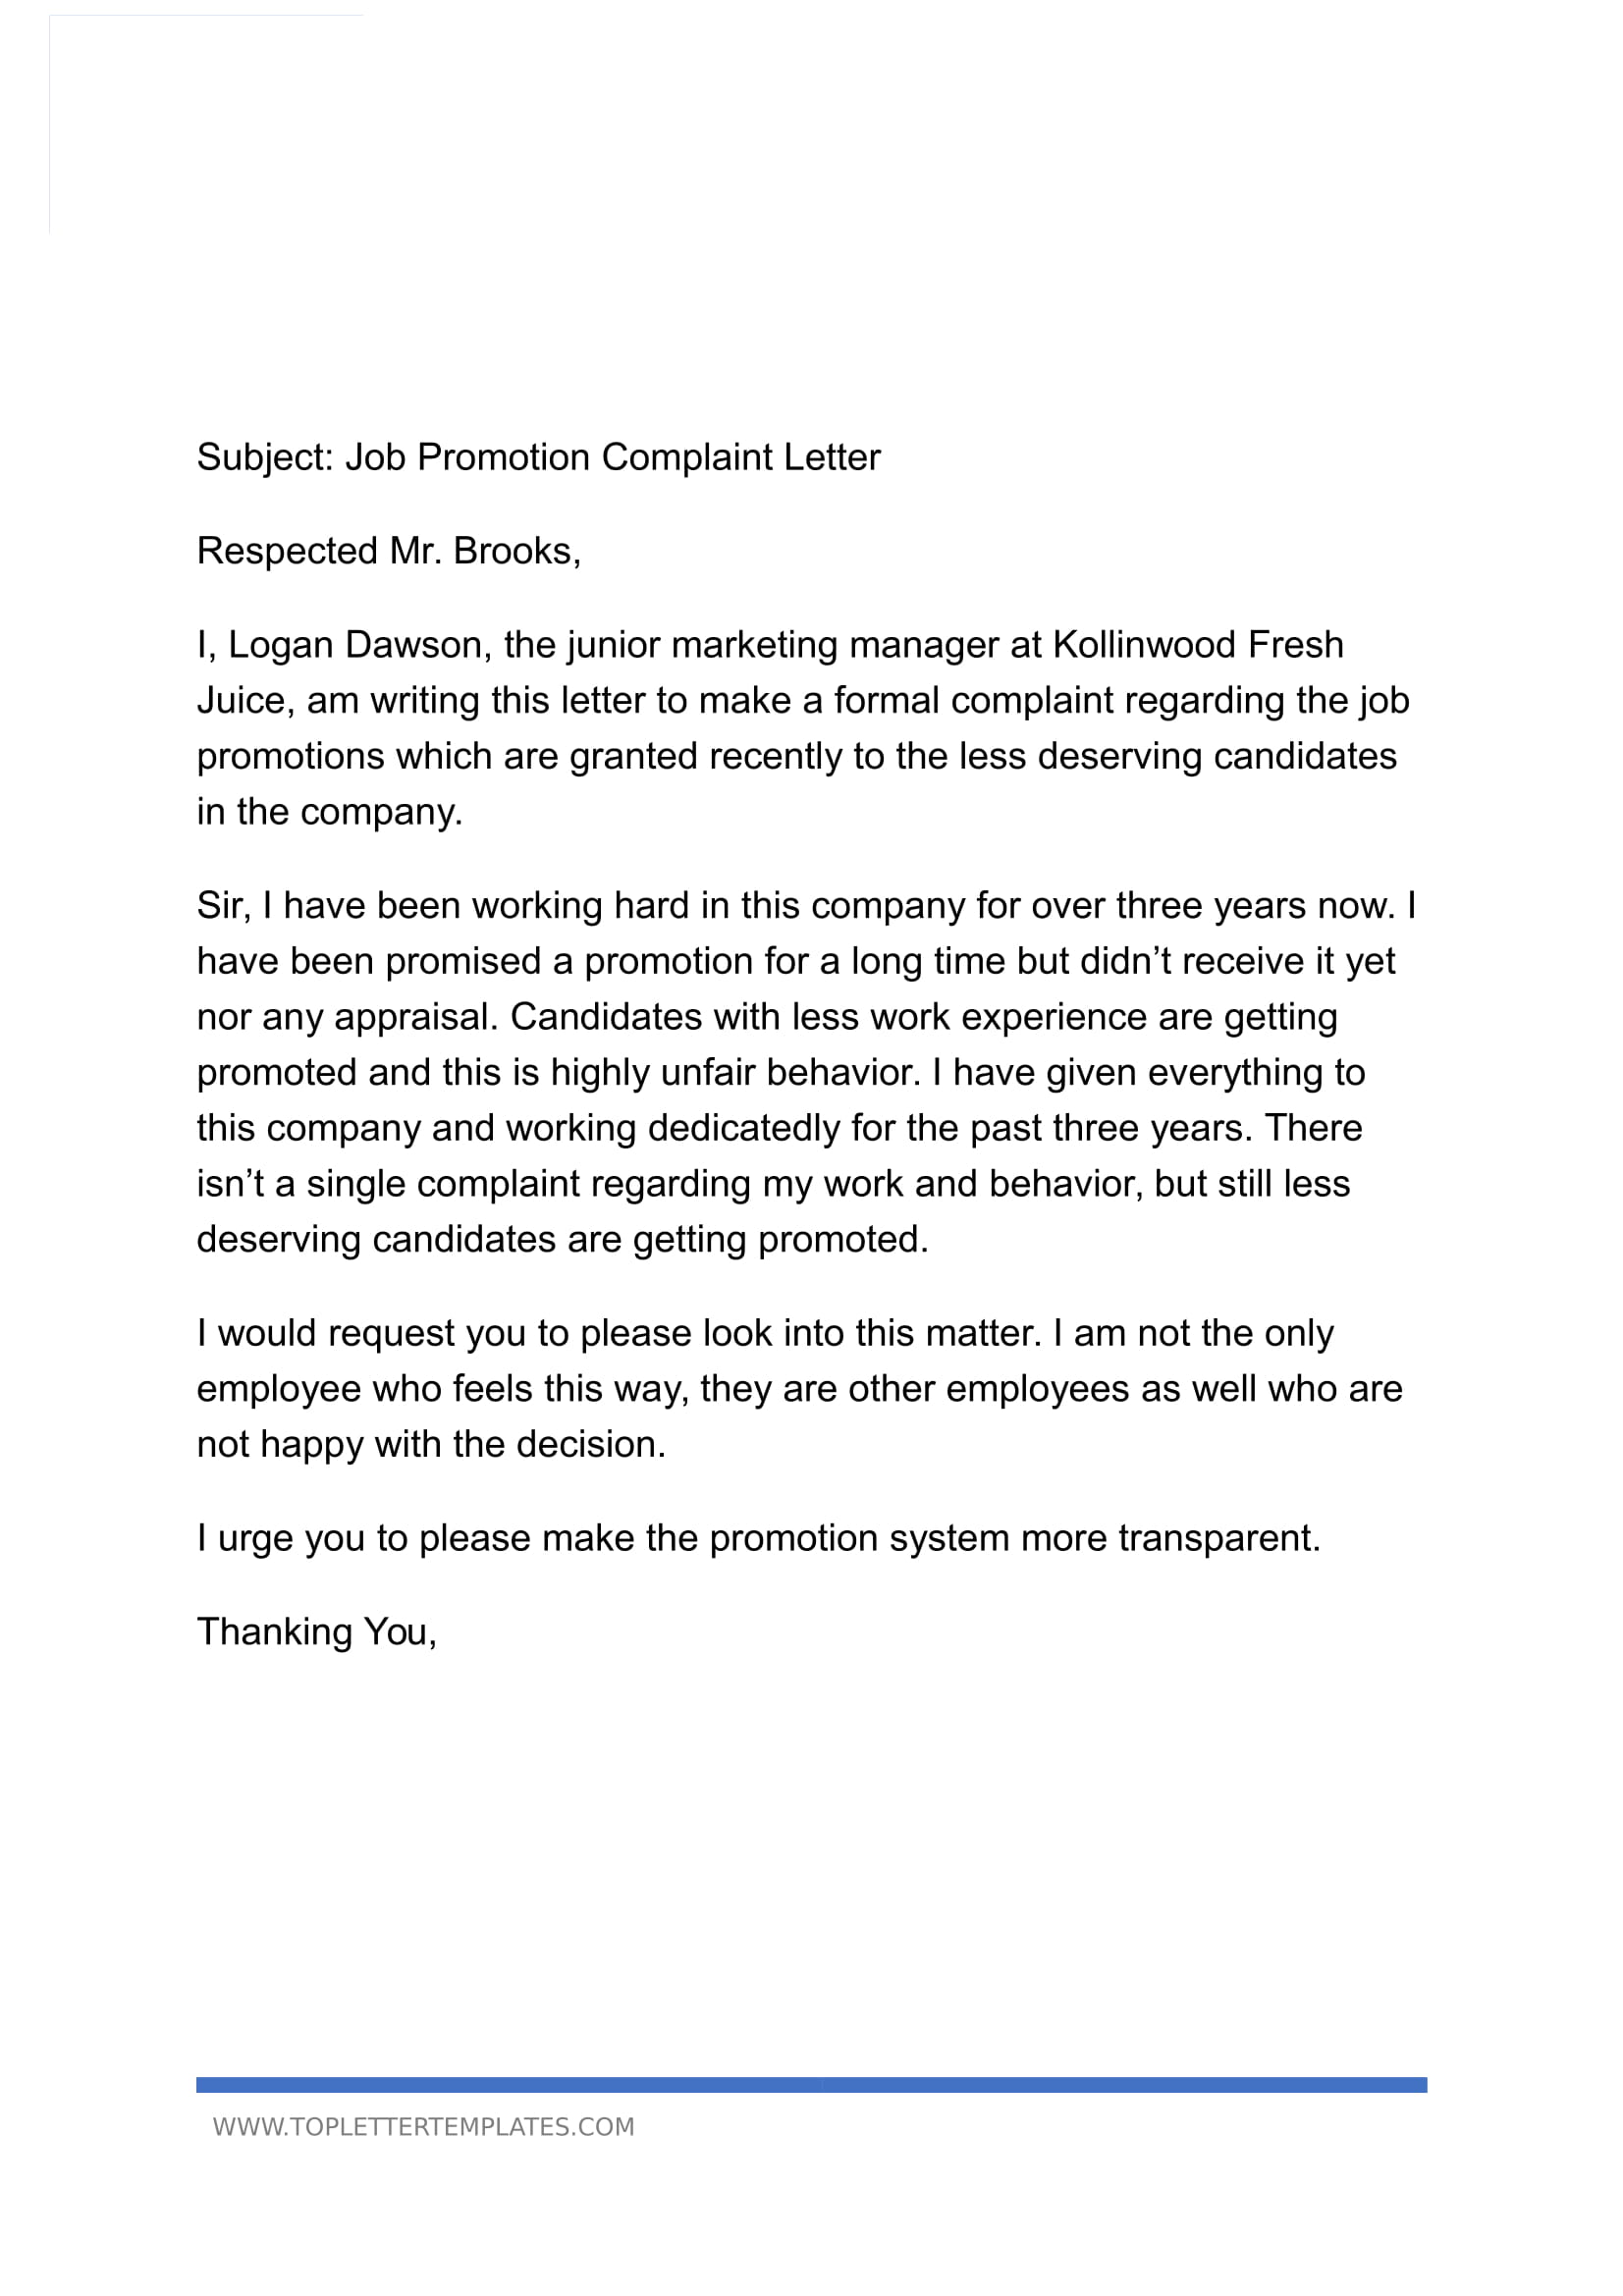 Sample Letter Of Complaint To Management from toplettertemplates.com